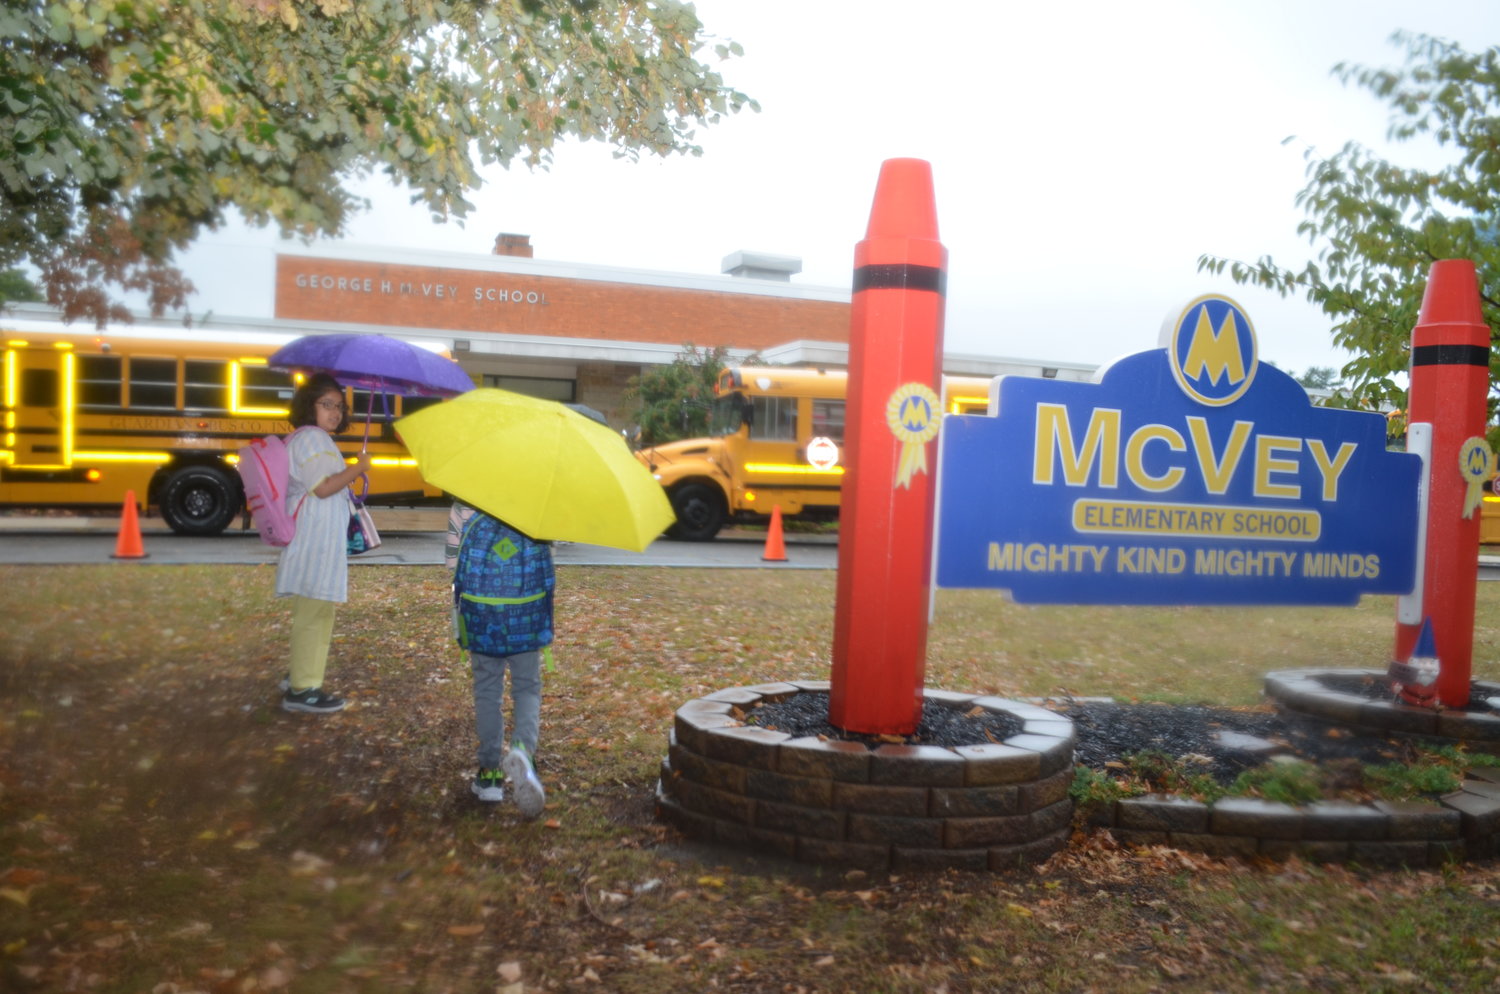 The rain didn’t keep the kids away at McVey Elementary School on Sept. 6. Students showed up in raincoats and umbrellas.